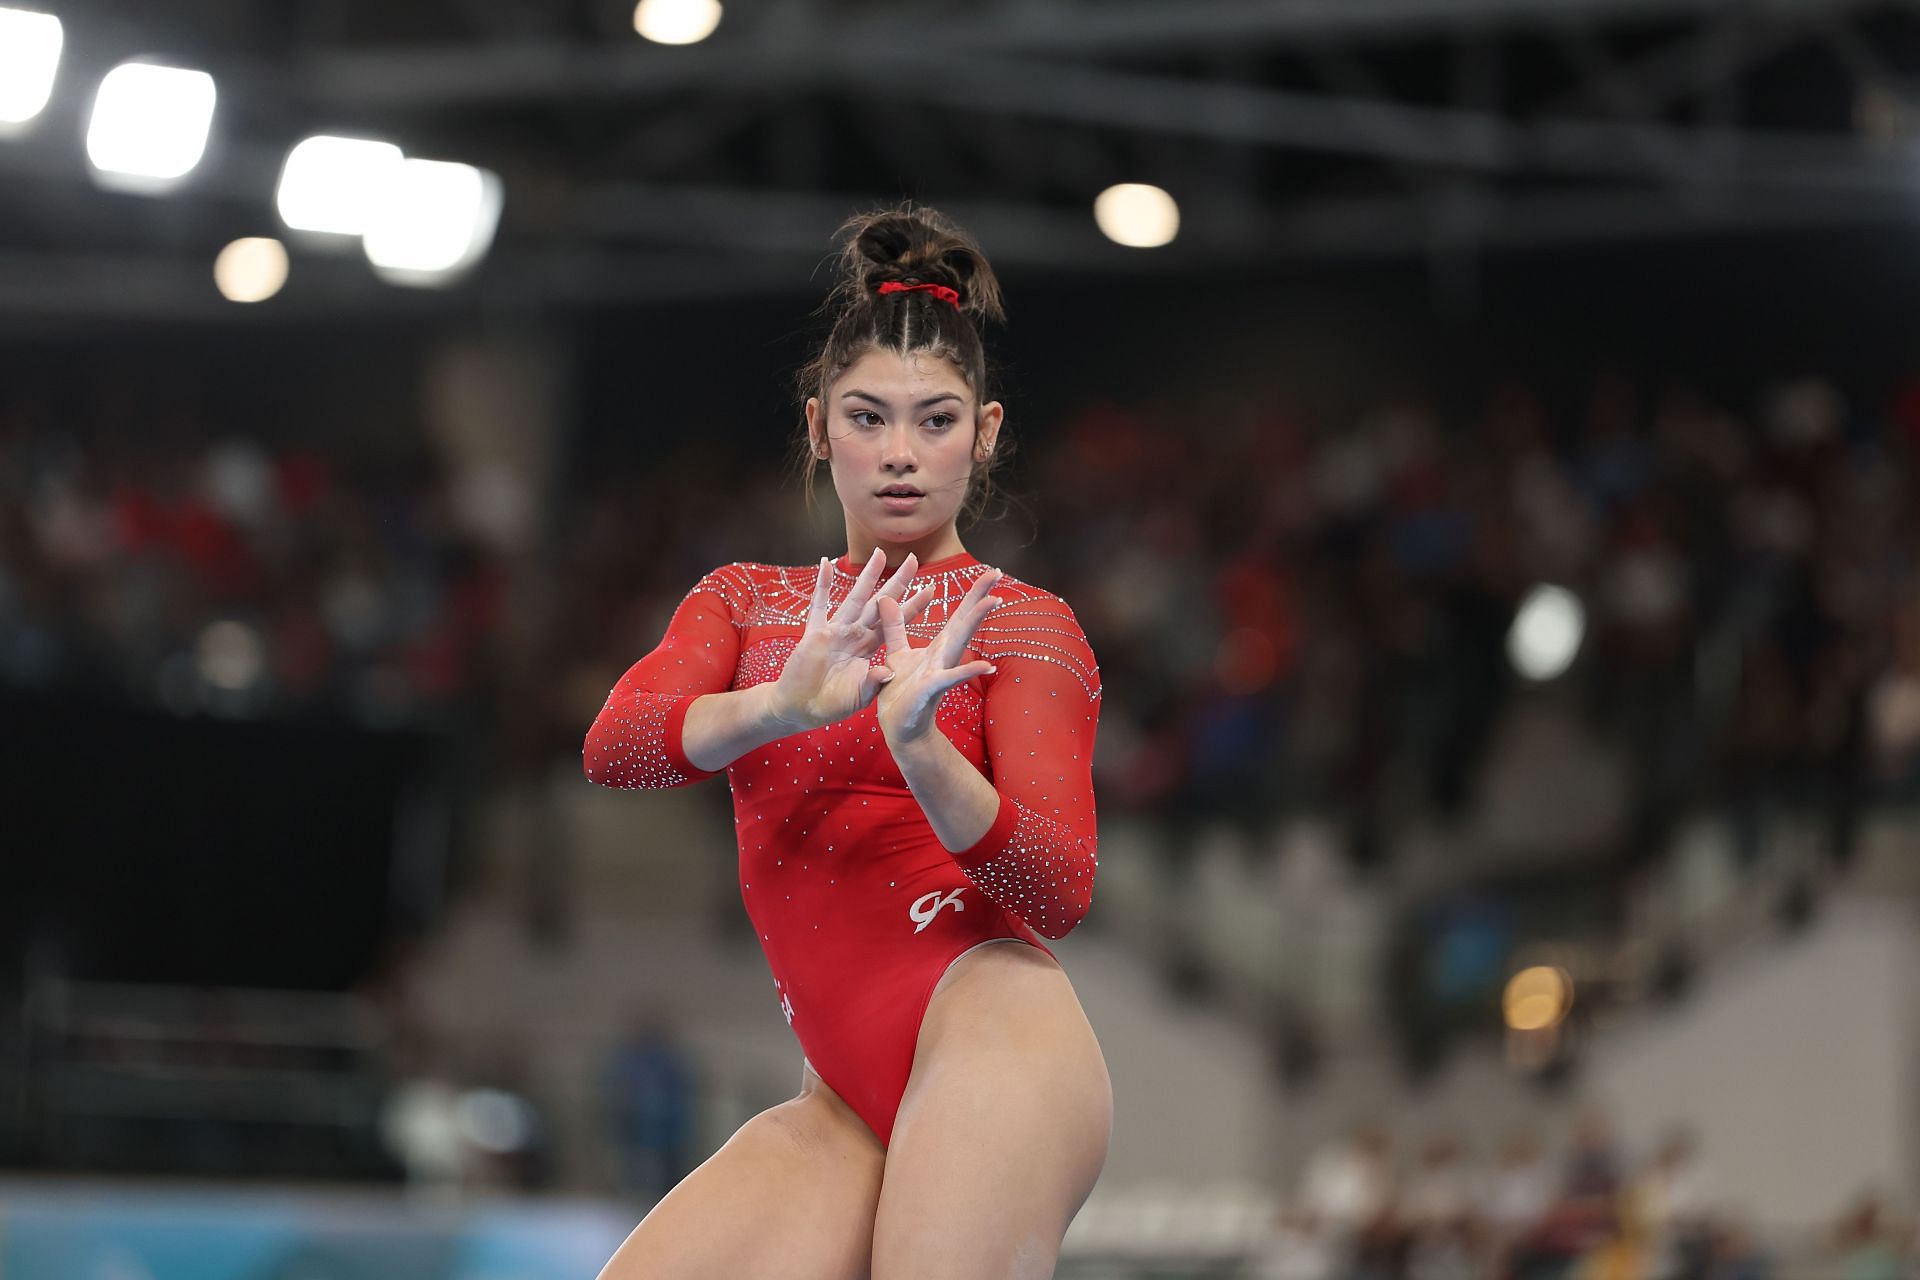 Kayla Dicello competes in Artistic Gymnastics - Floor Exercise at the 2023 Pan Am Games in Santiago, Chile.